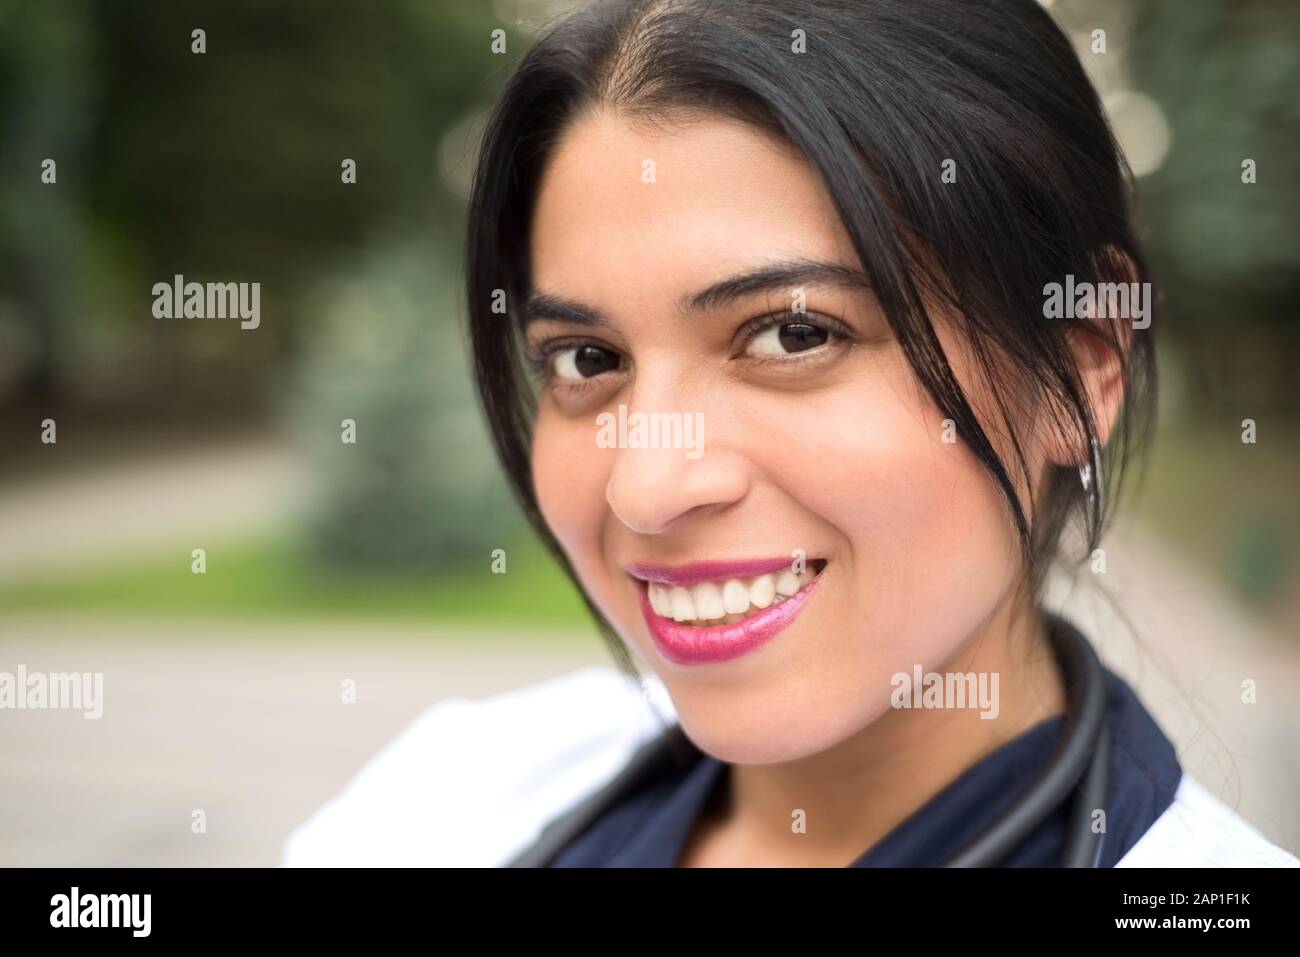 https://c8.alamy.com/comp/2AP1F1K/portrait-of-a-beautiful-young-mexican-girl-doctor-smiles-woman-in-a-white-coat-with-a-stethoscope-outdoor-in-2AP1F1K.jpg